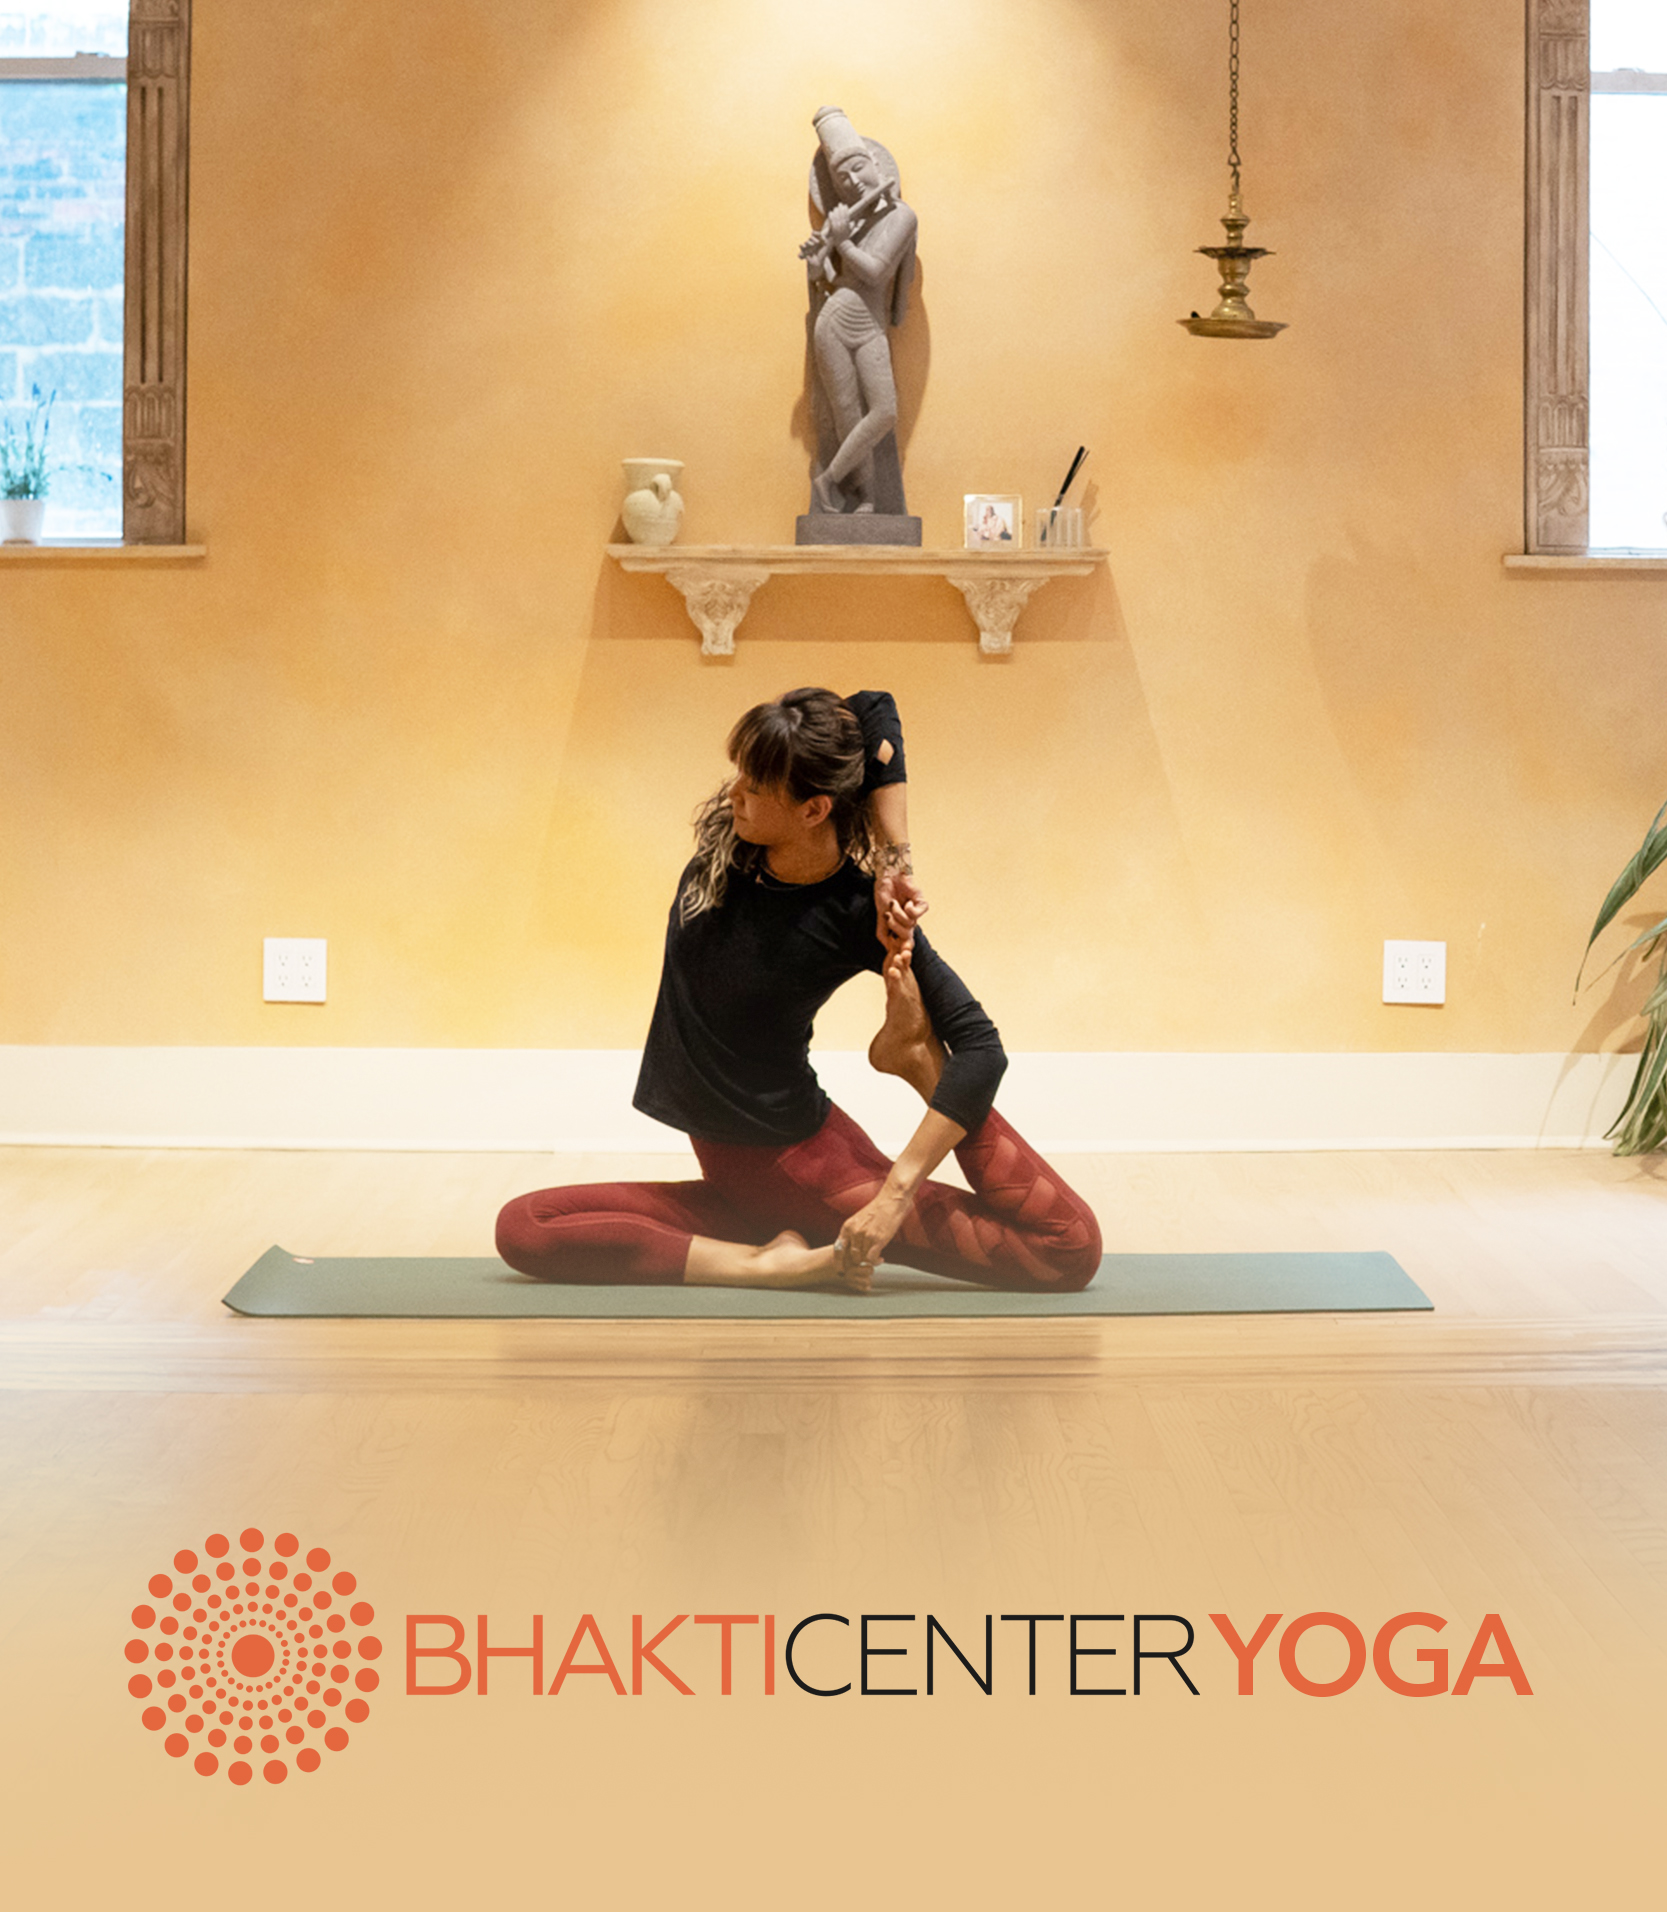 Yoga Plant - Expert Yoga and Meditation Classes in NYC.